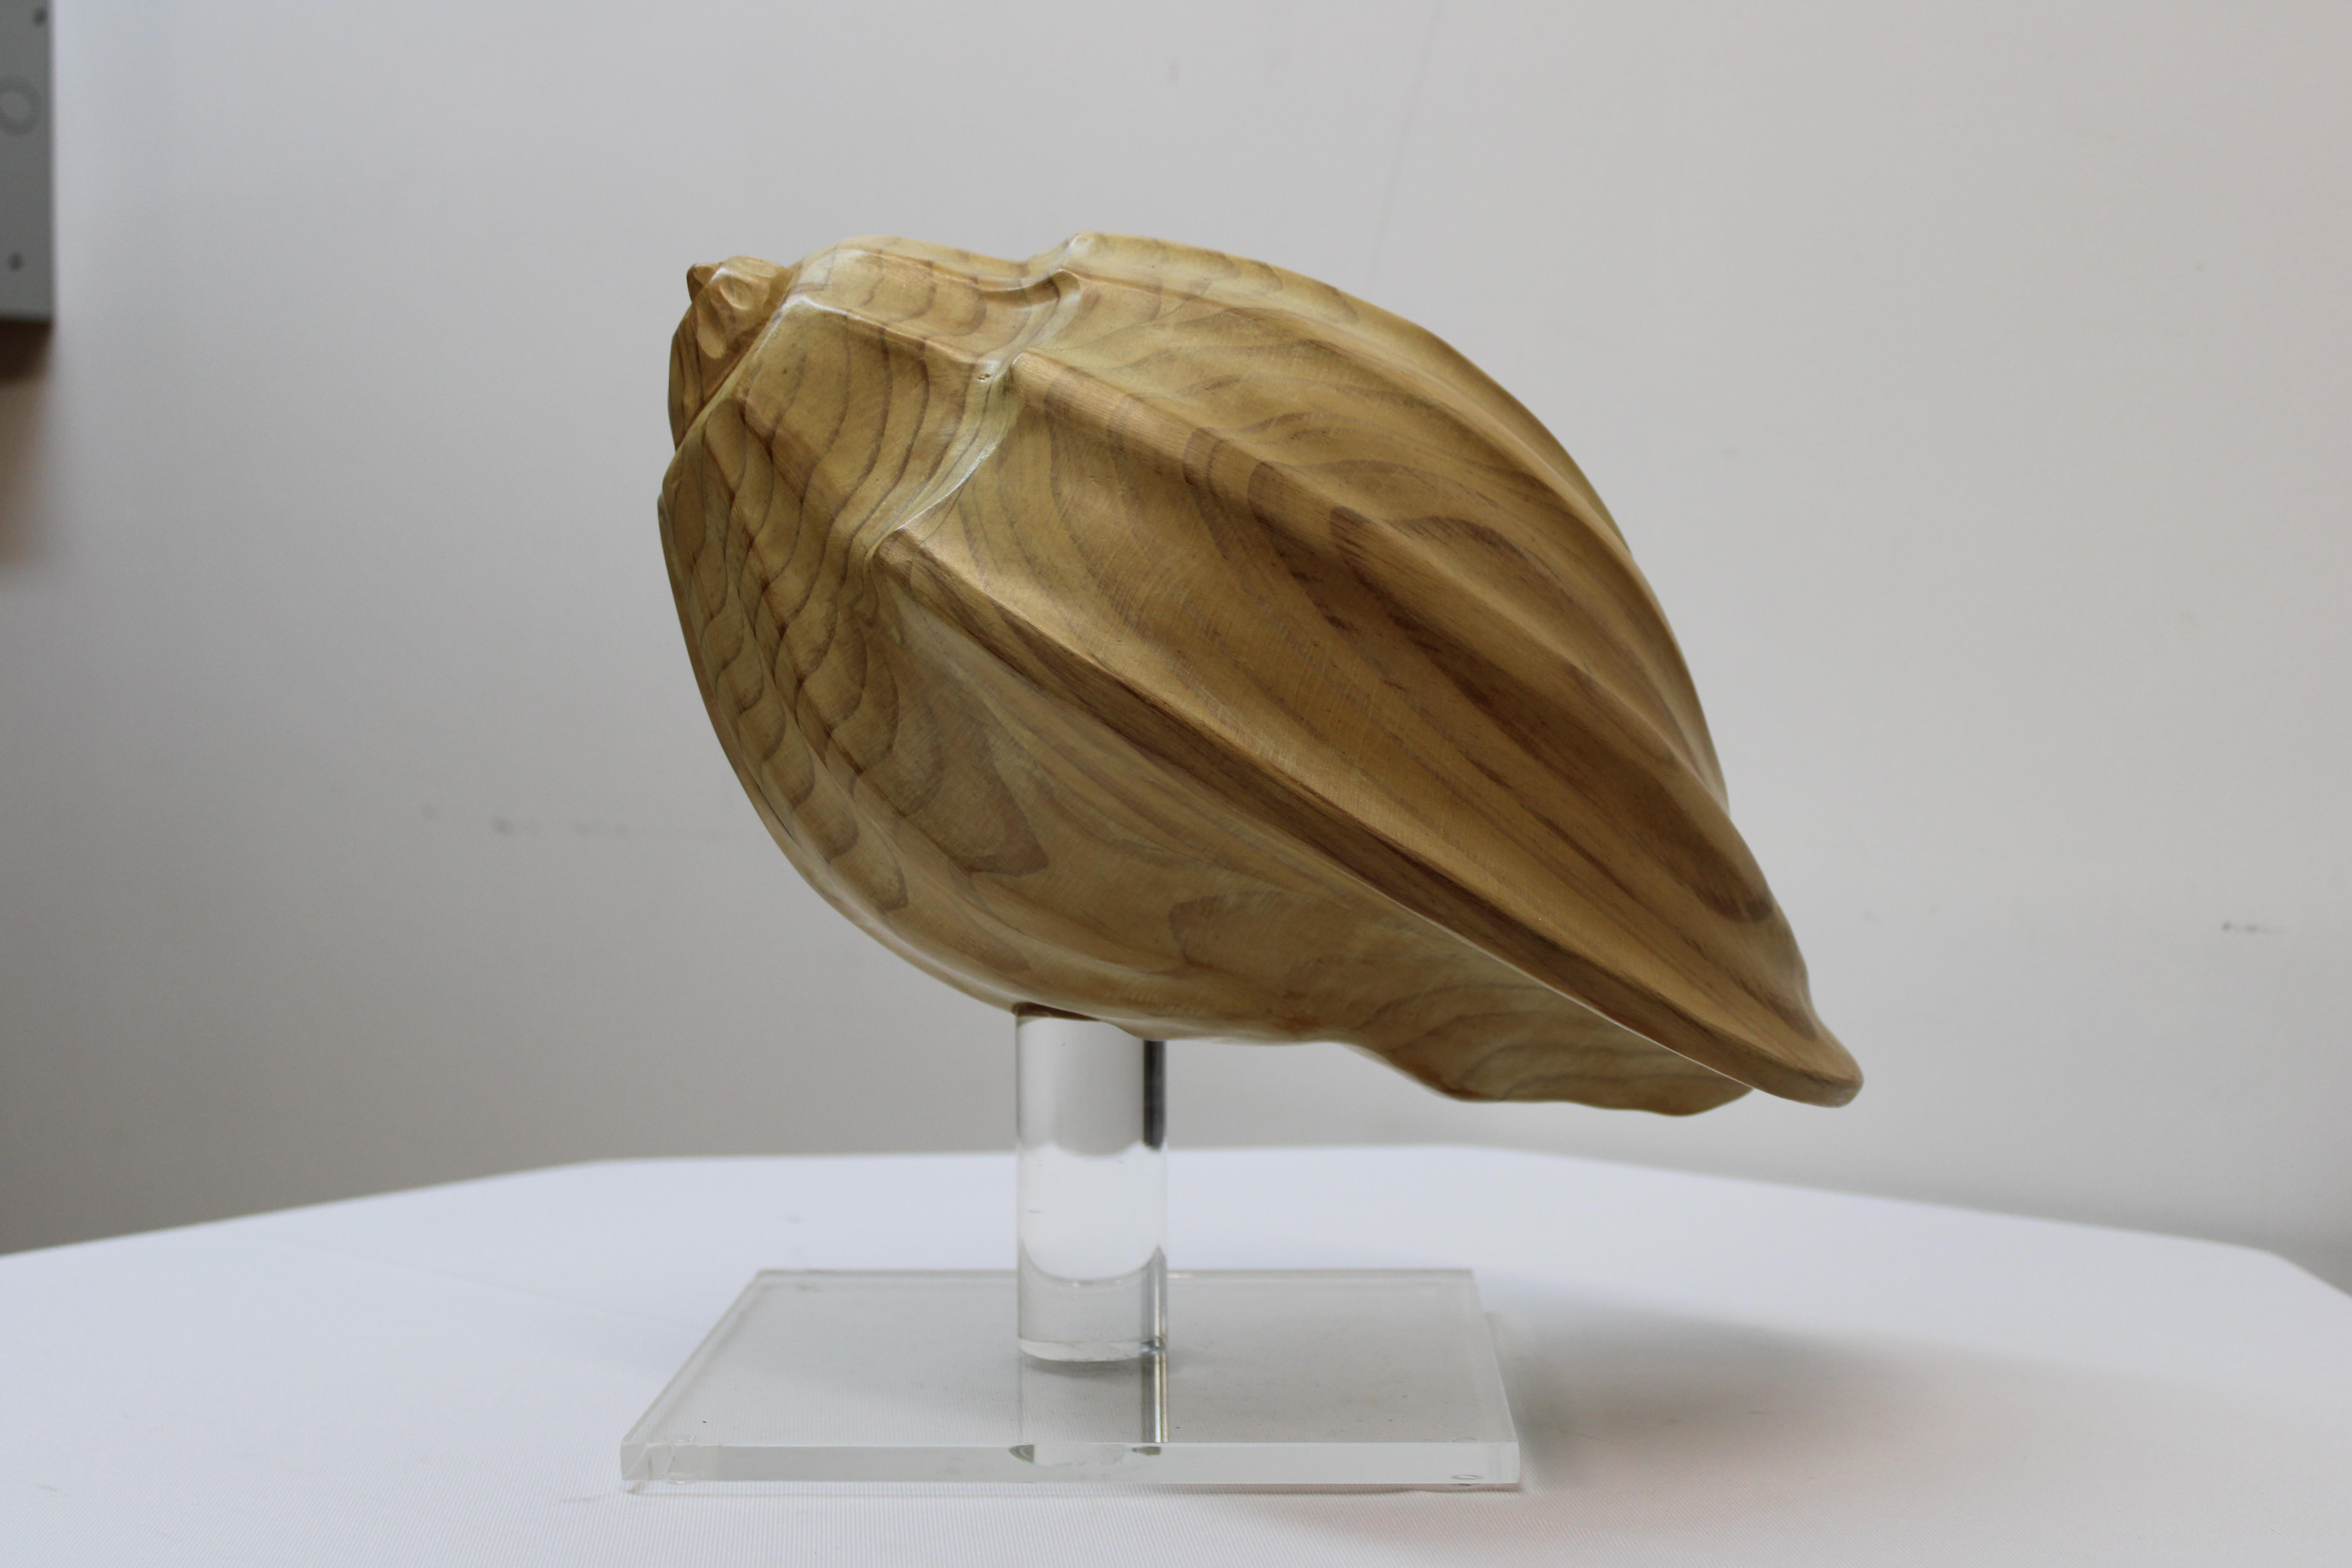 C. 20th century

Carved wood conch shell on lucite base.